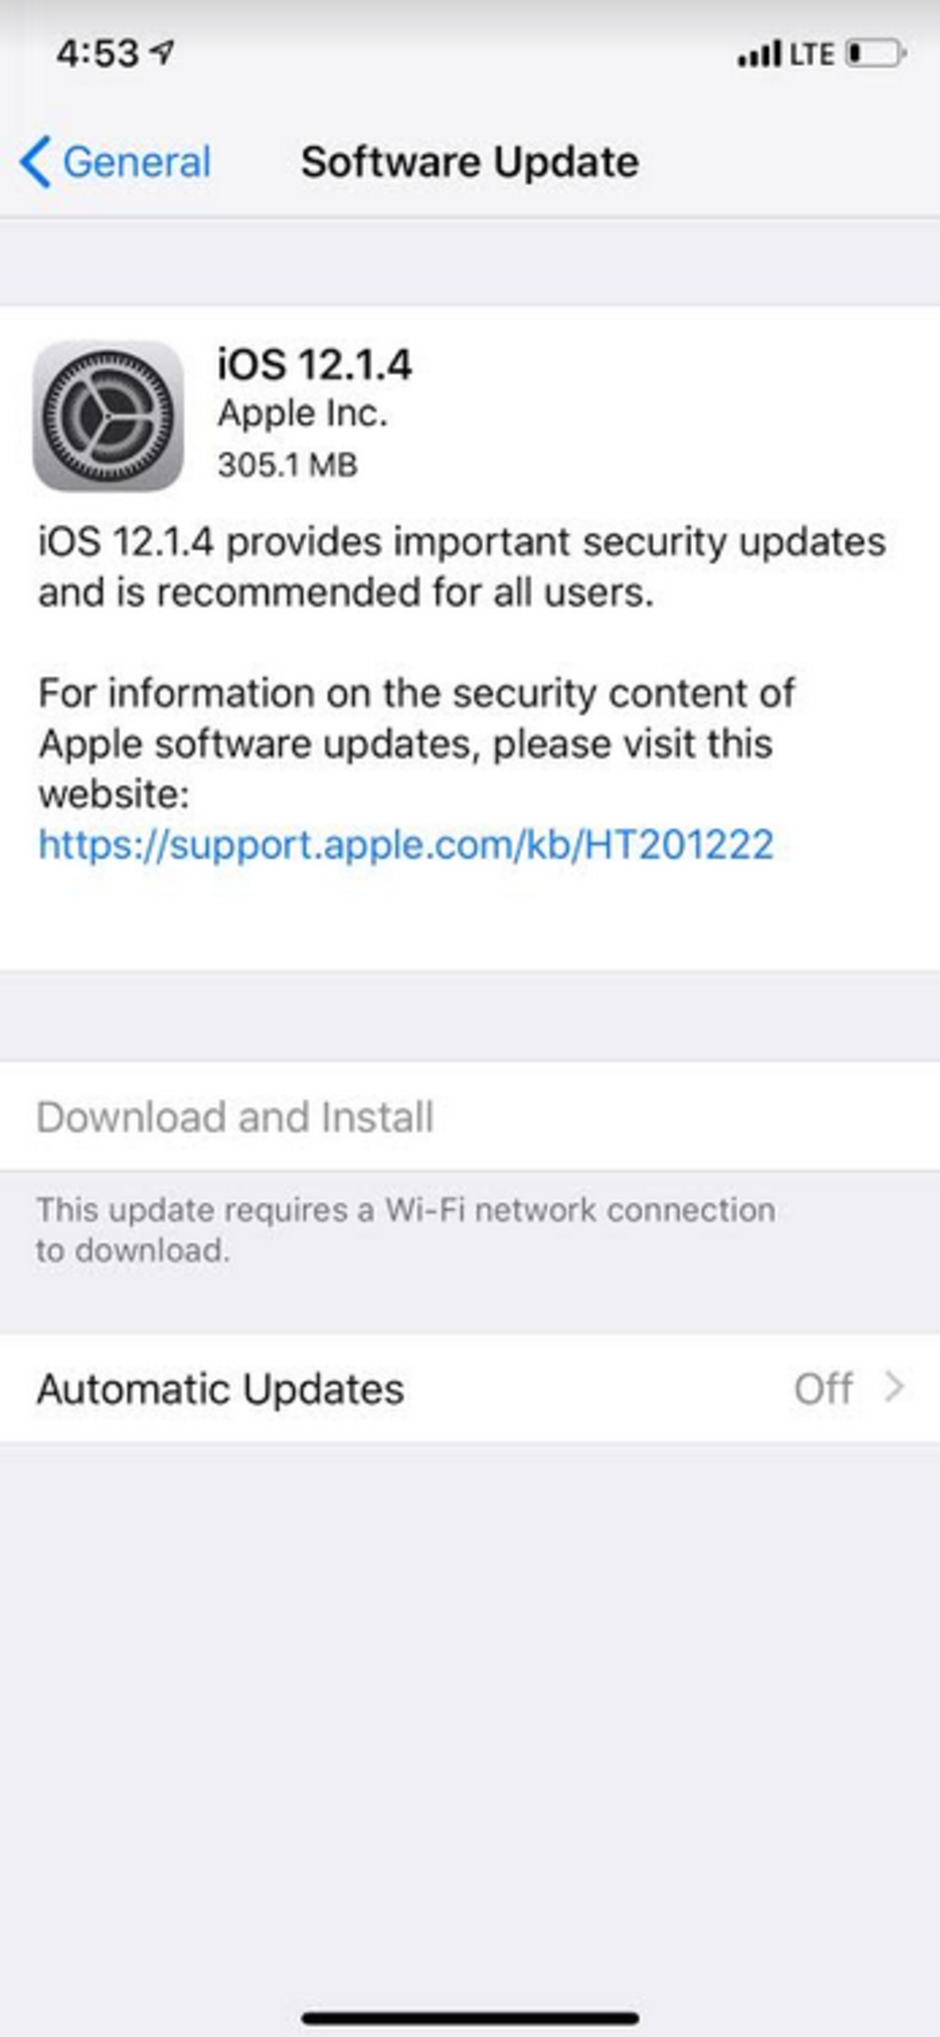 Apple sends out iOS 12.1.4 which fixes Group FaceTime bug - Apple to fix Group FaceTime bug today with iOS update